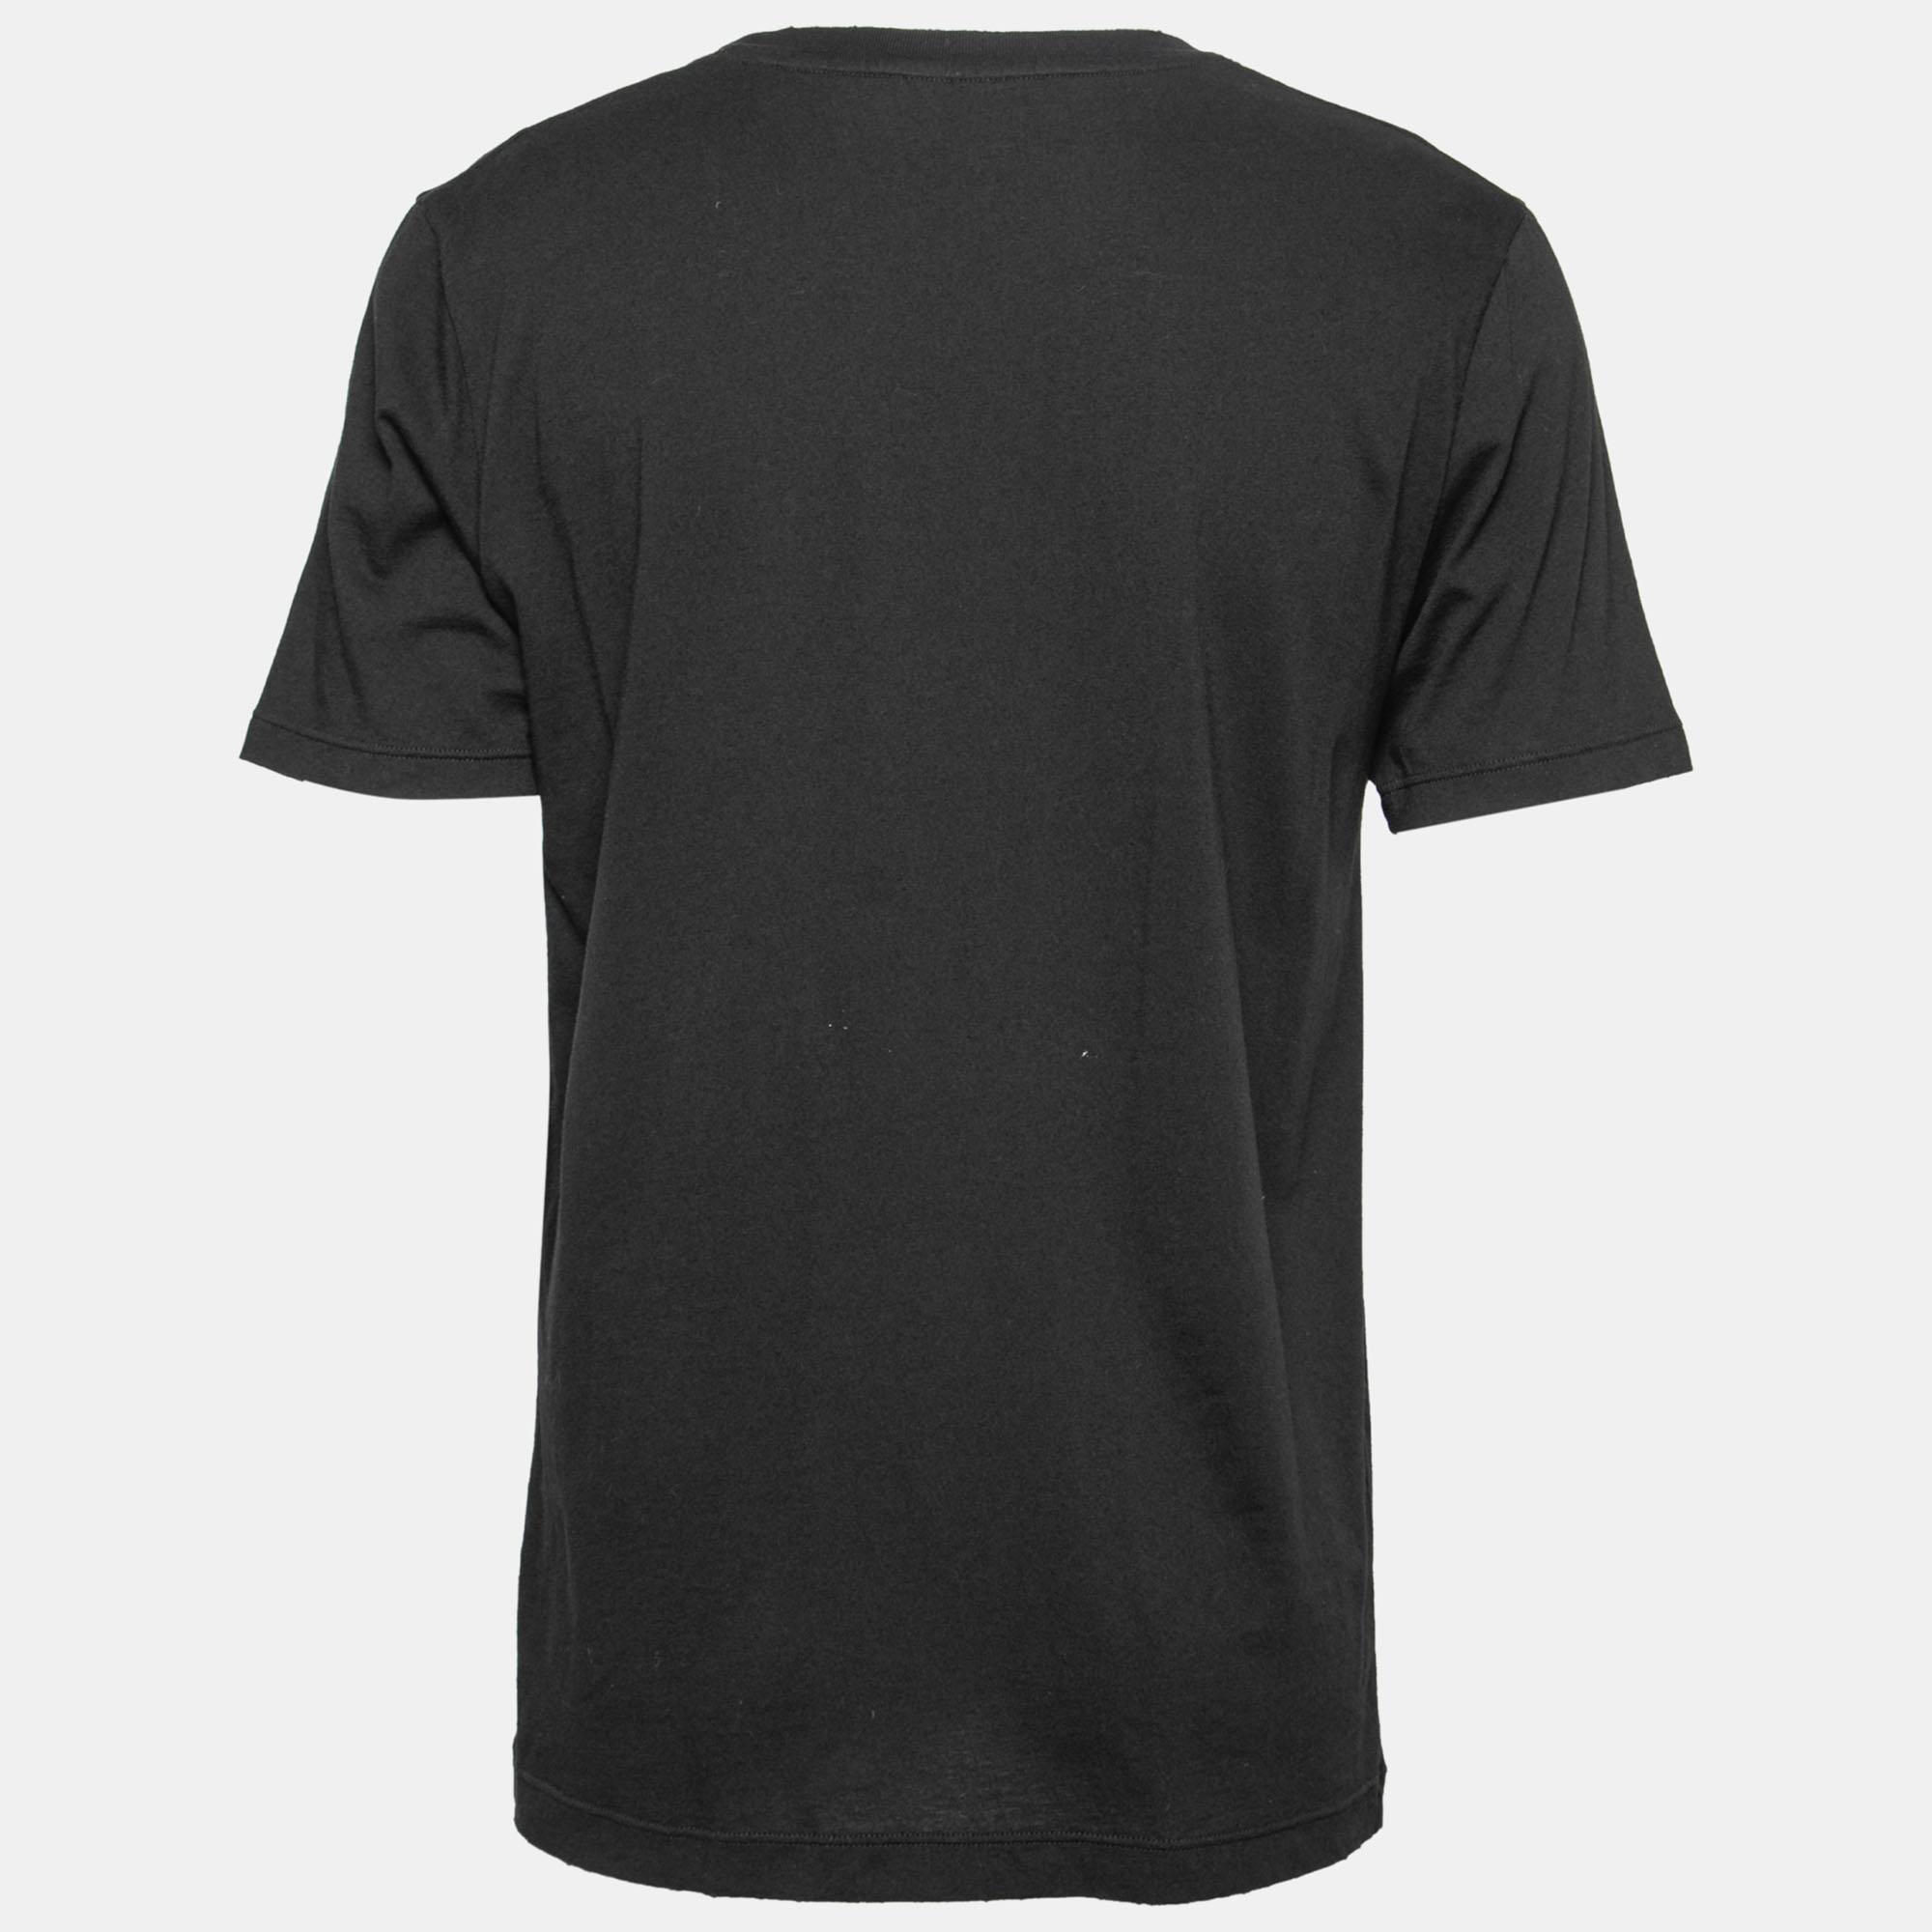 This T-shirt from Gucci keeps you at ease and maximizes your comfort. Made of cotton fabric and enhanced with the brand logo printed on the front, the piece is an example of fine craftsmanship and luxe casual style. Pair this black Gucci T-shirt